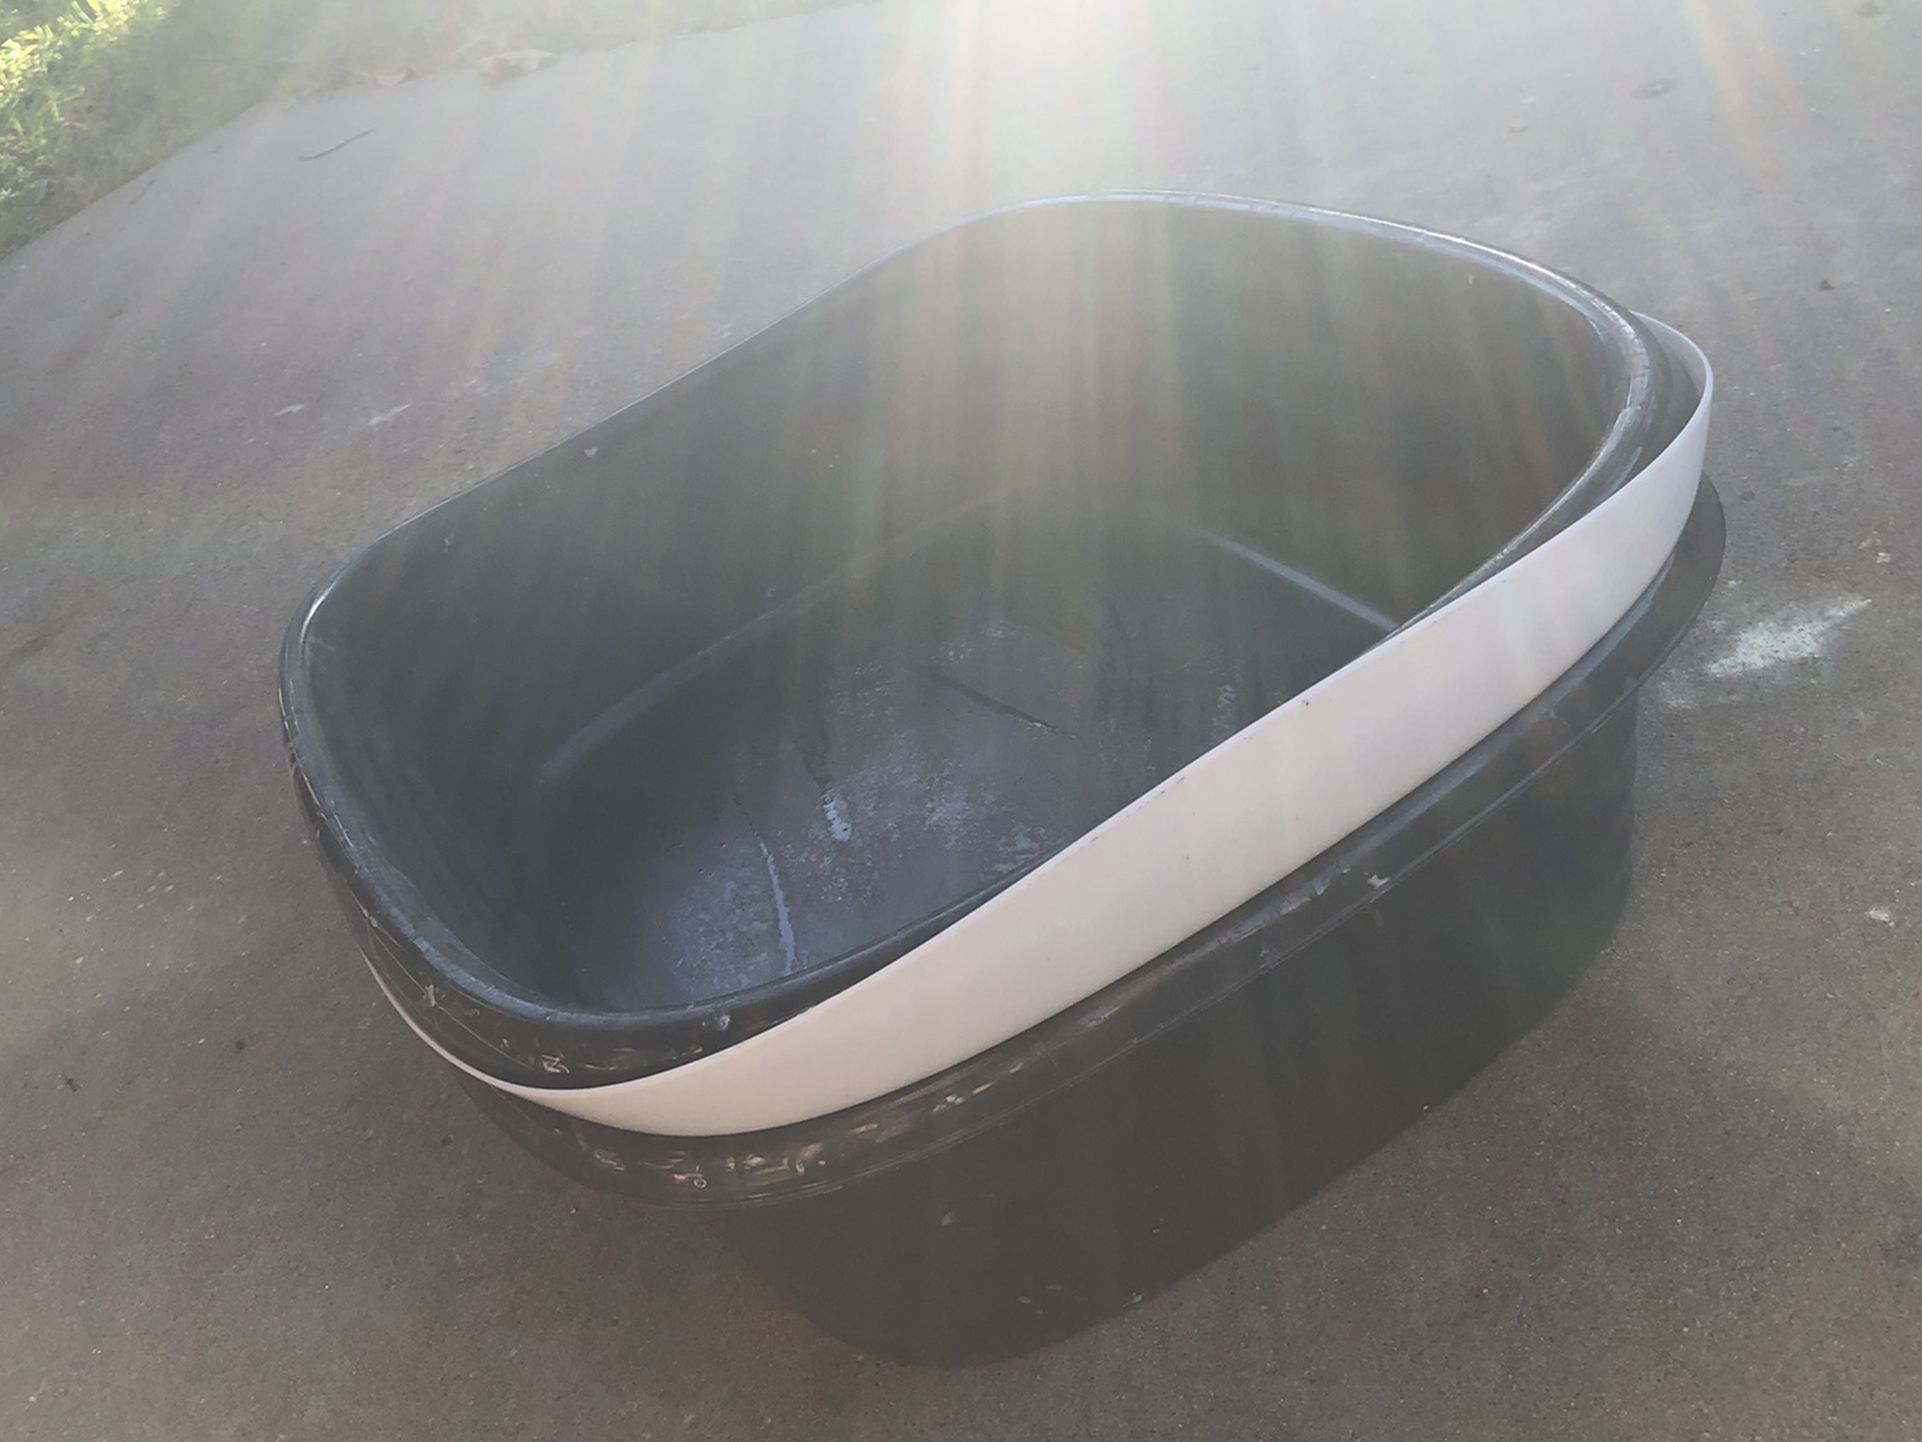 Super Cat Litter Box 10 Dollars Comes With Cat Bowl As Well